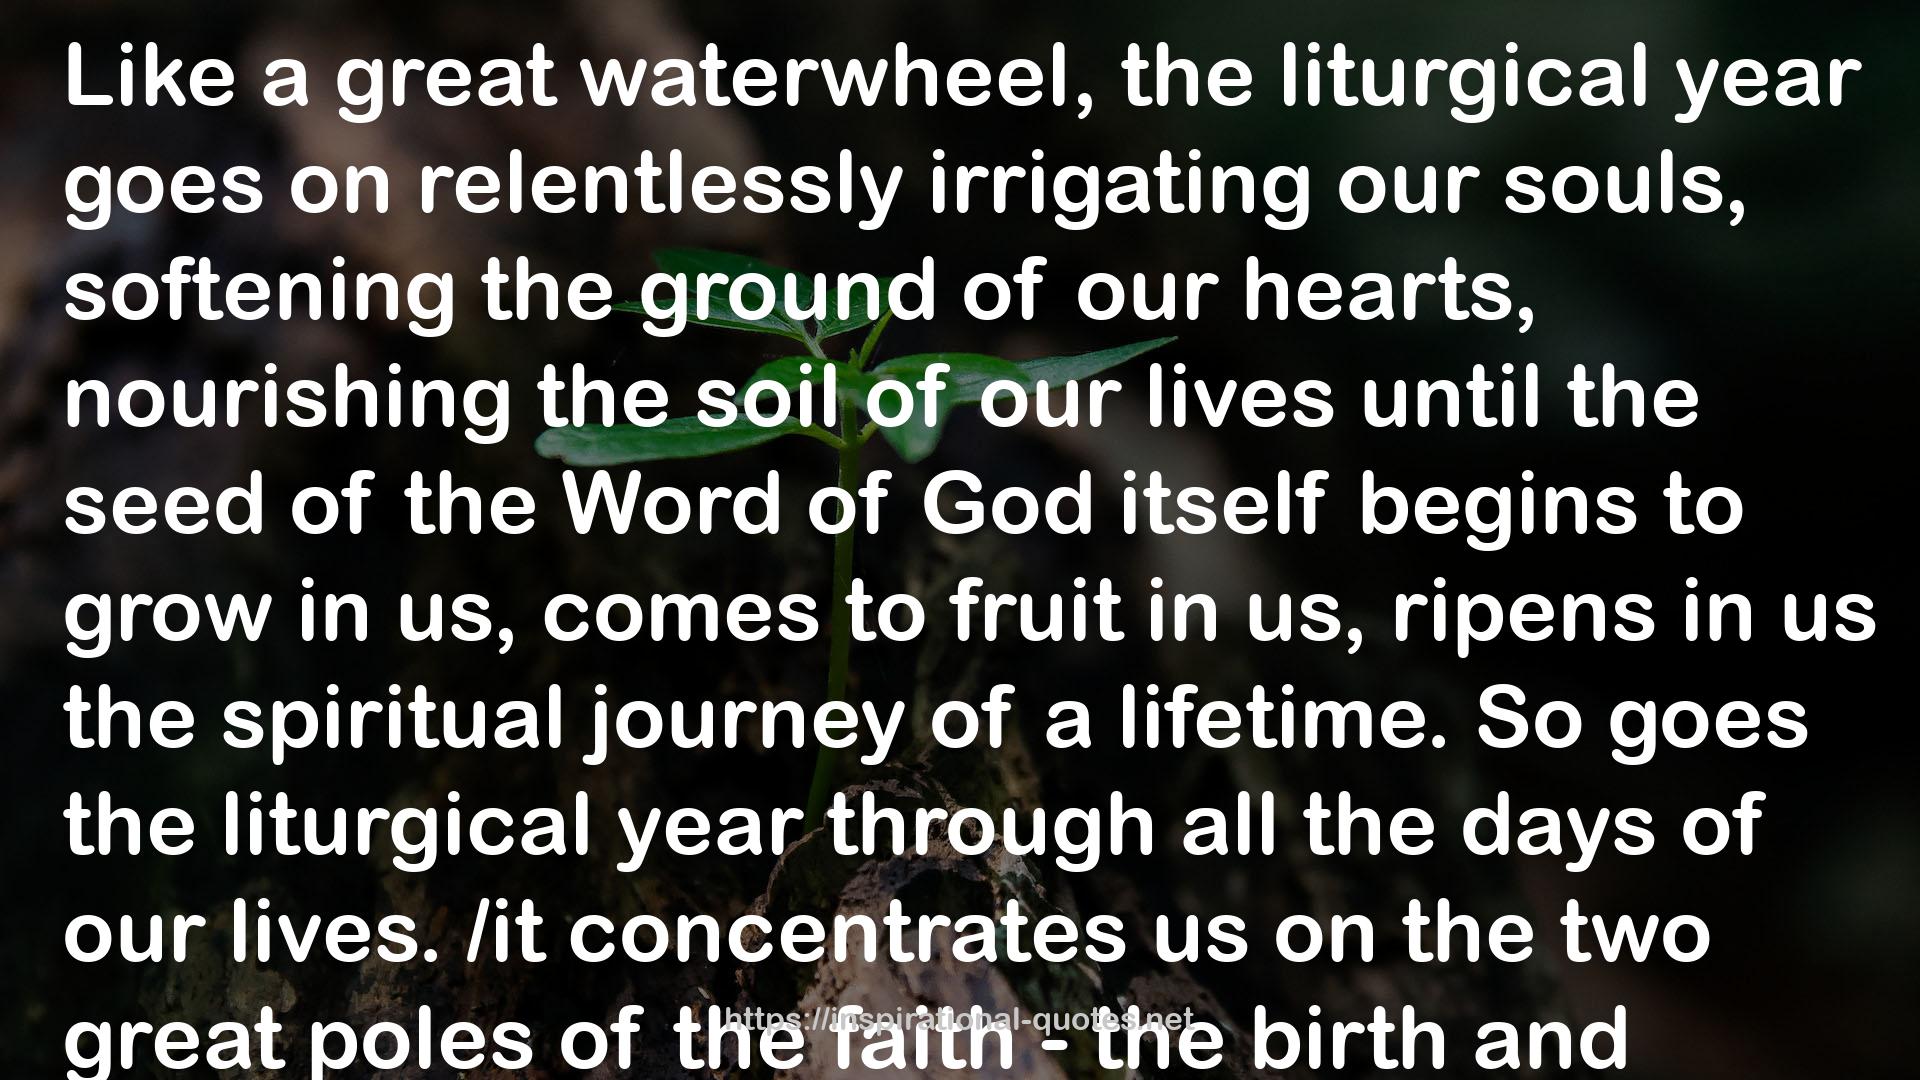 The Liturgical Year: The Spiraling Adventure of the Spiritual Life - The Ancient Practices Series QUOTES